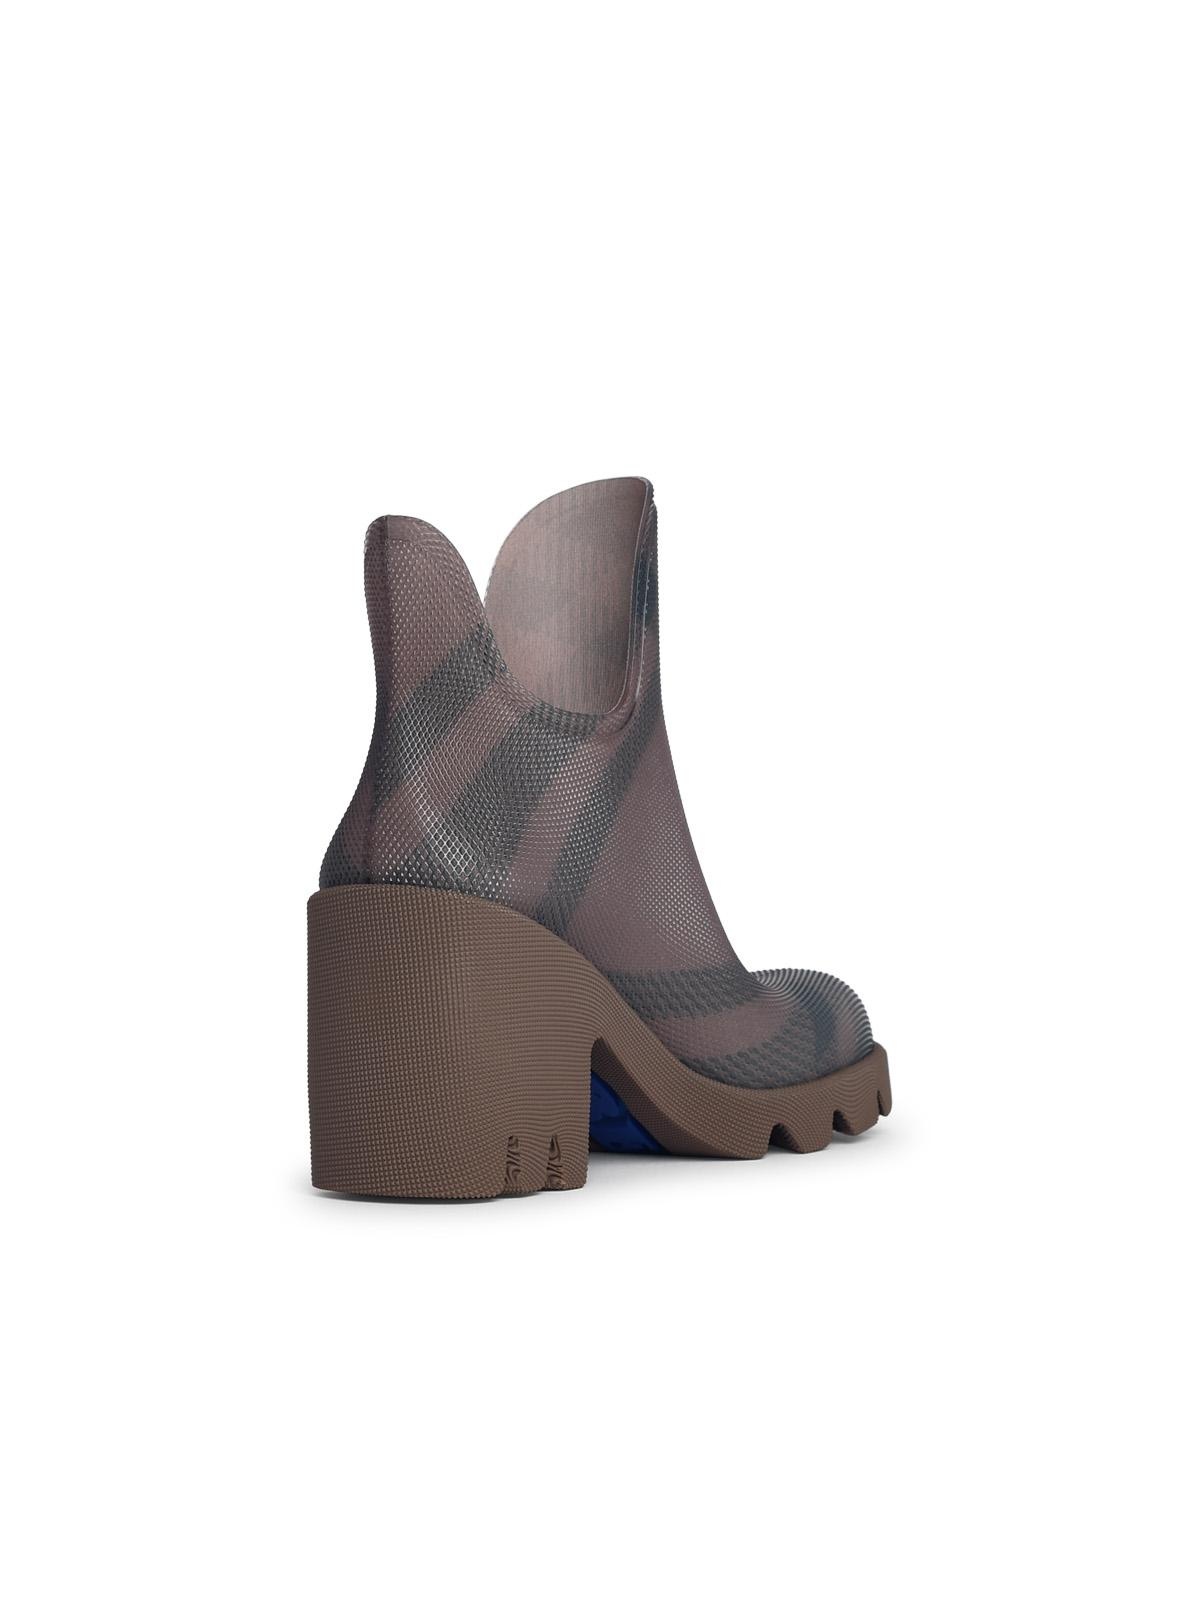 Burberry 'Marsh' Beige Rubber Ankle Boots - 3